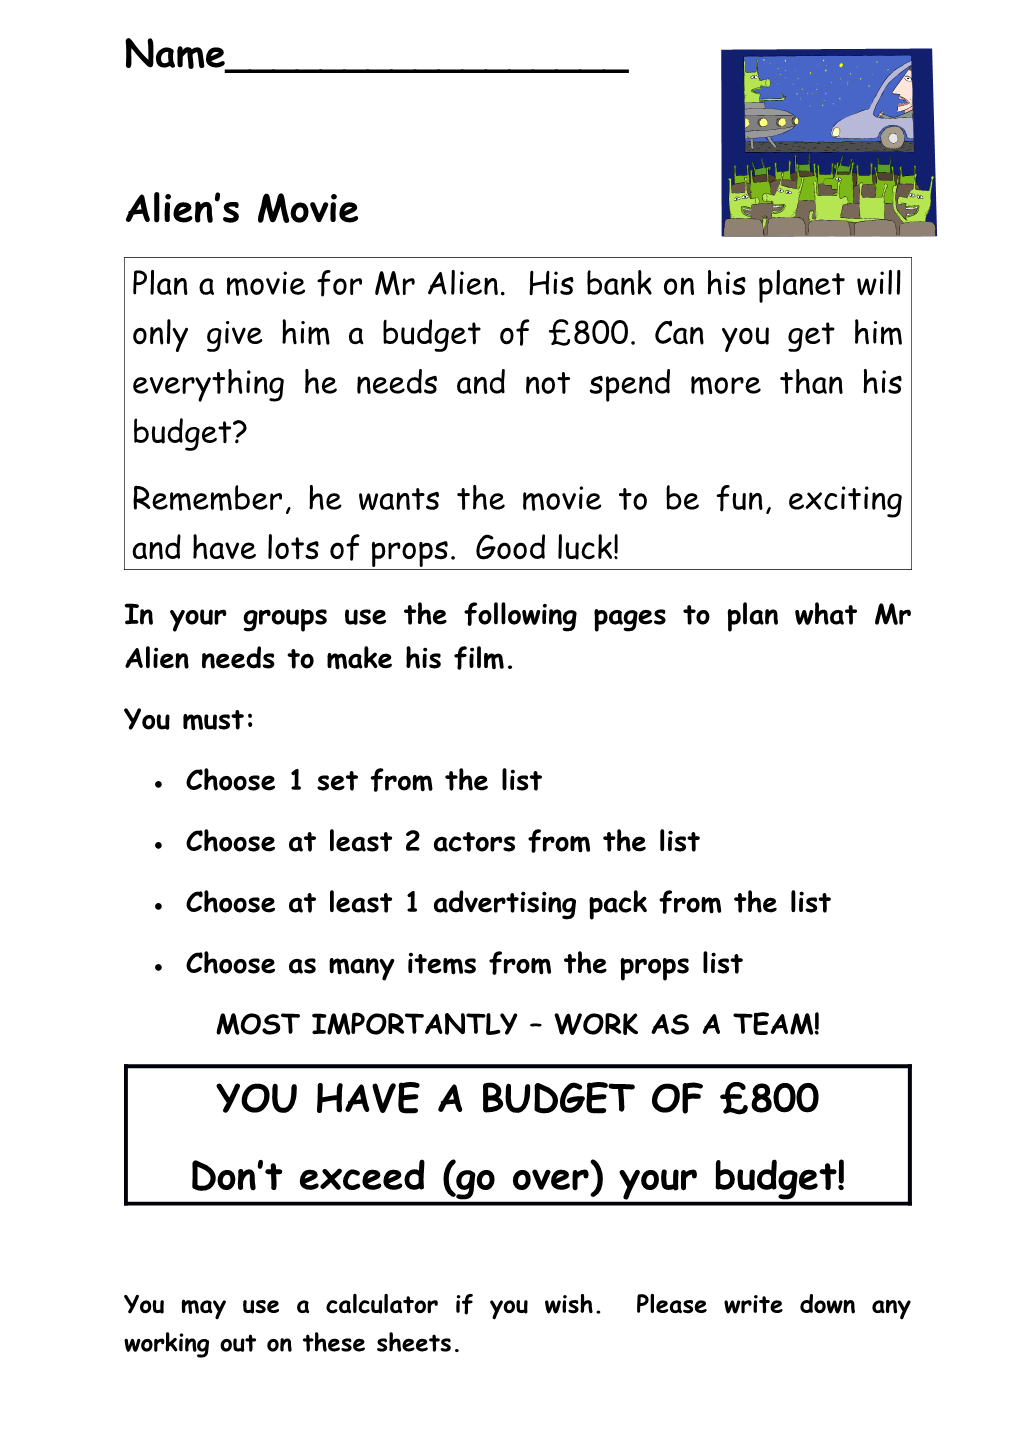 In Your Groups Use the Following Pages to Plan What Mr Alien Needs to Make His Film